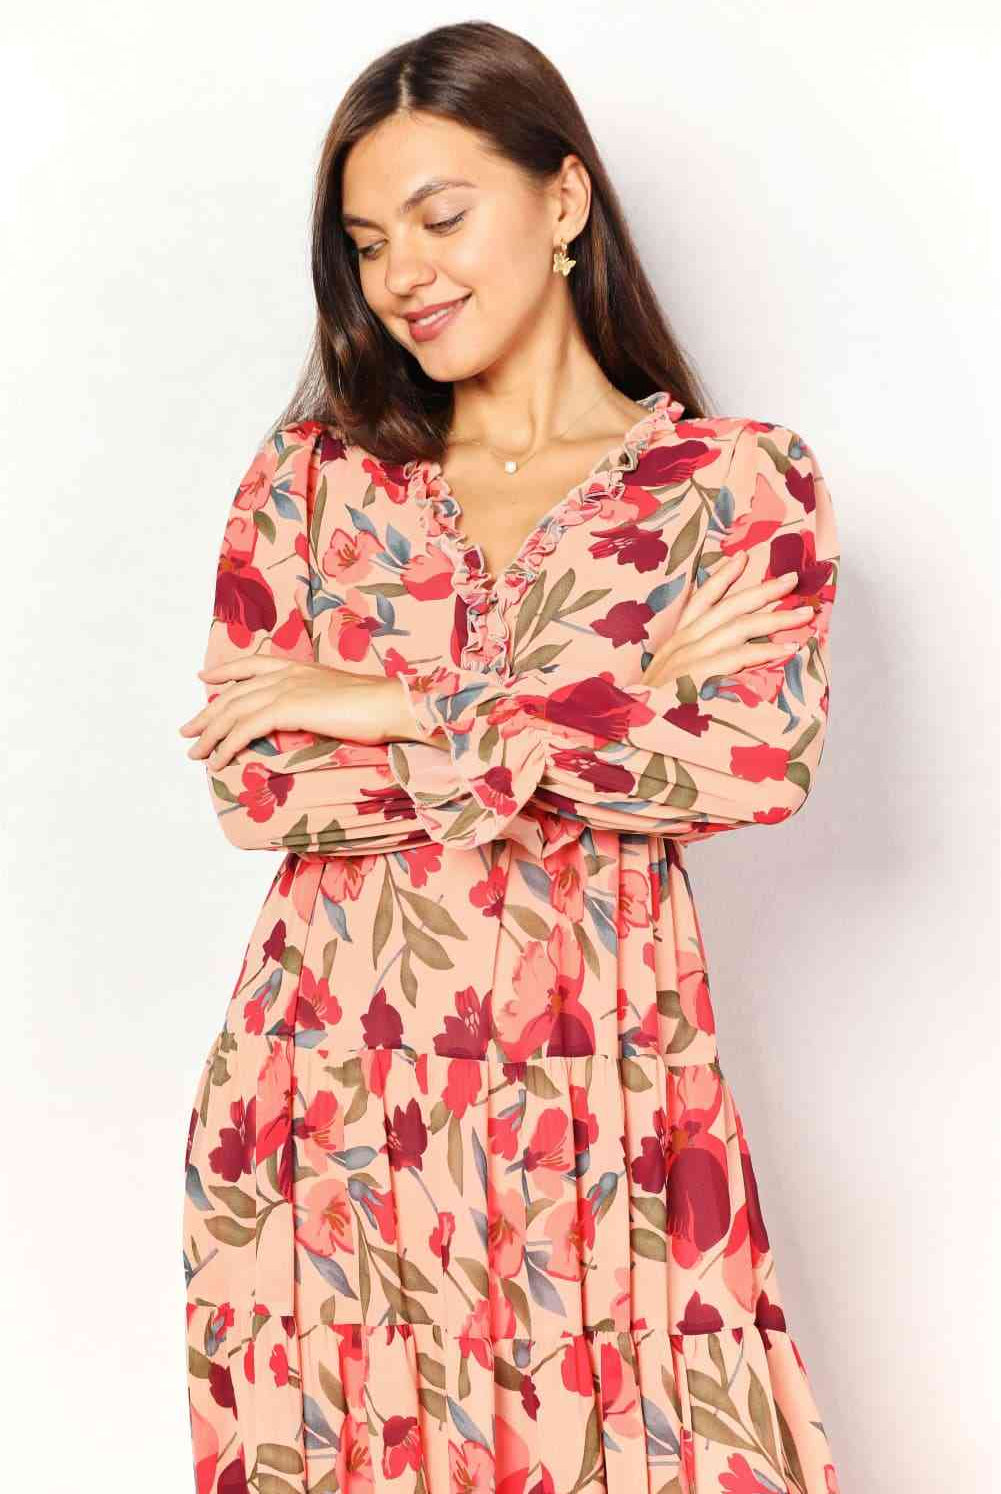 Ivy Reina United States Floral S undefined undefined